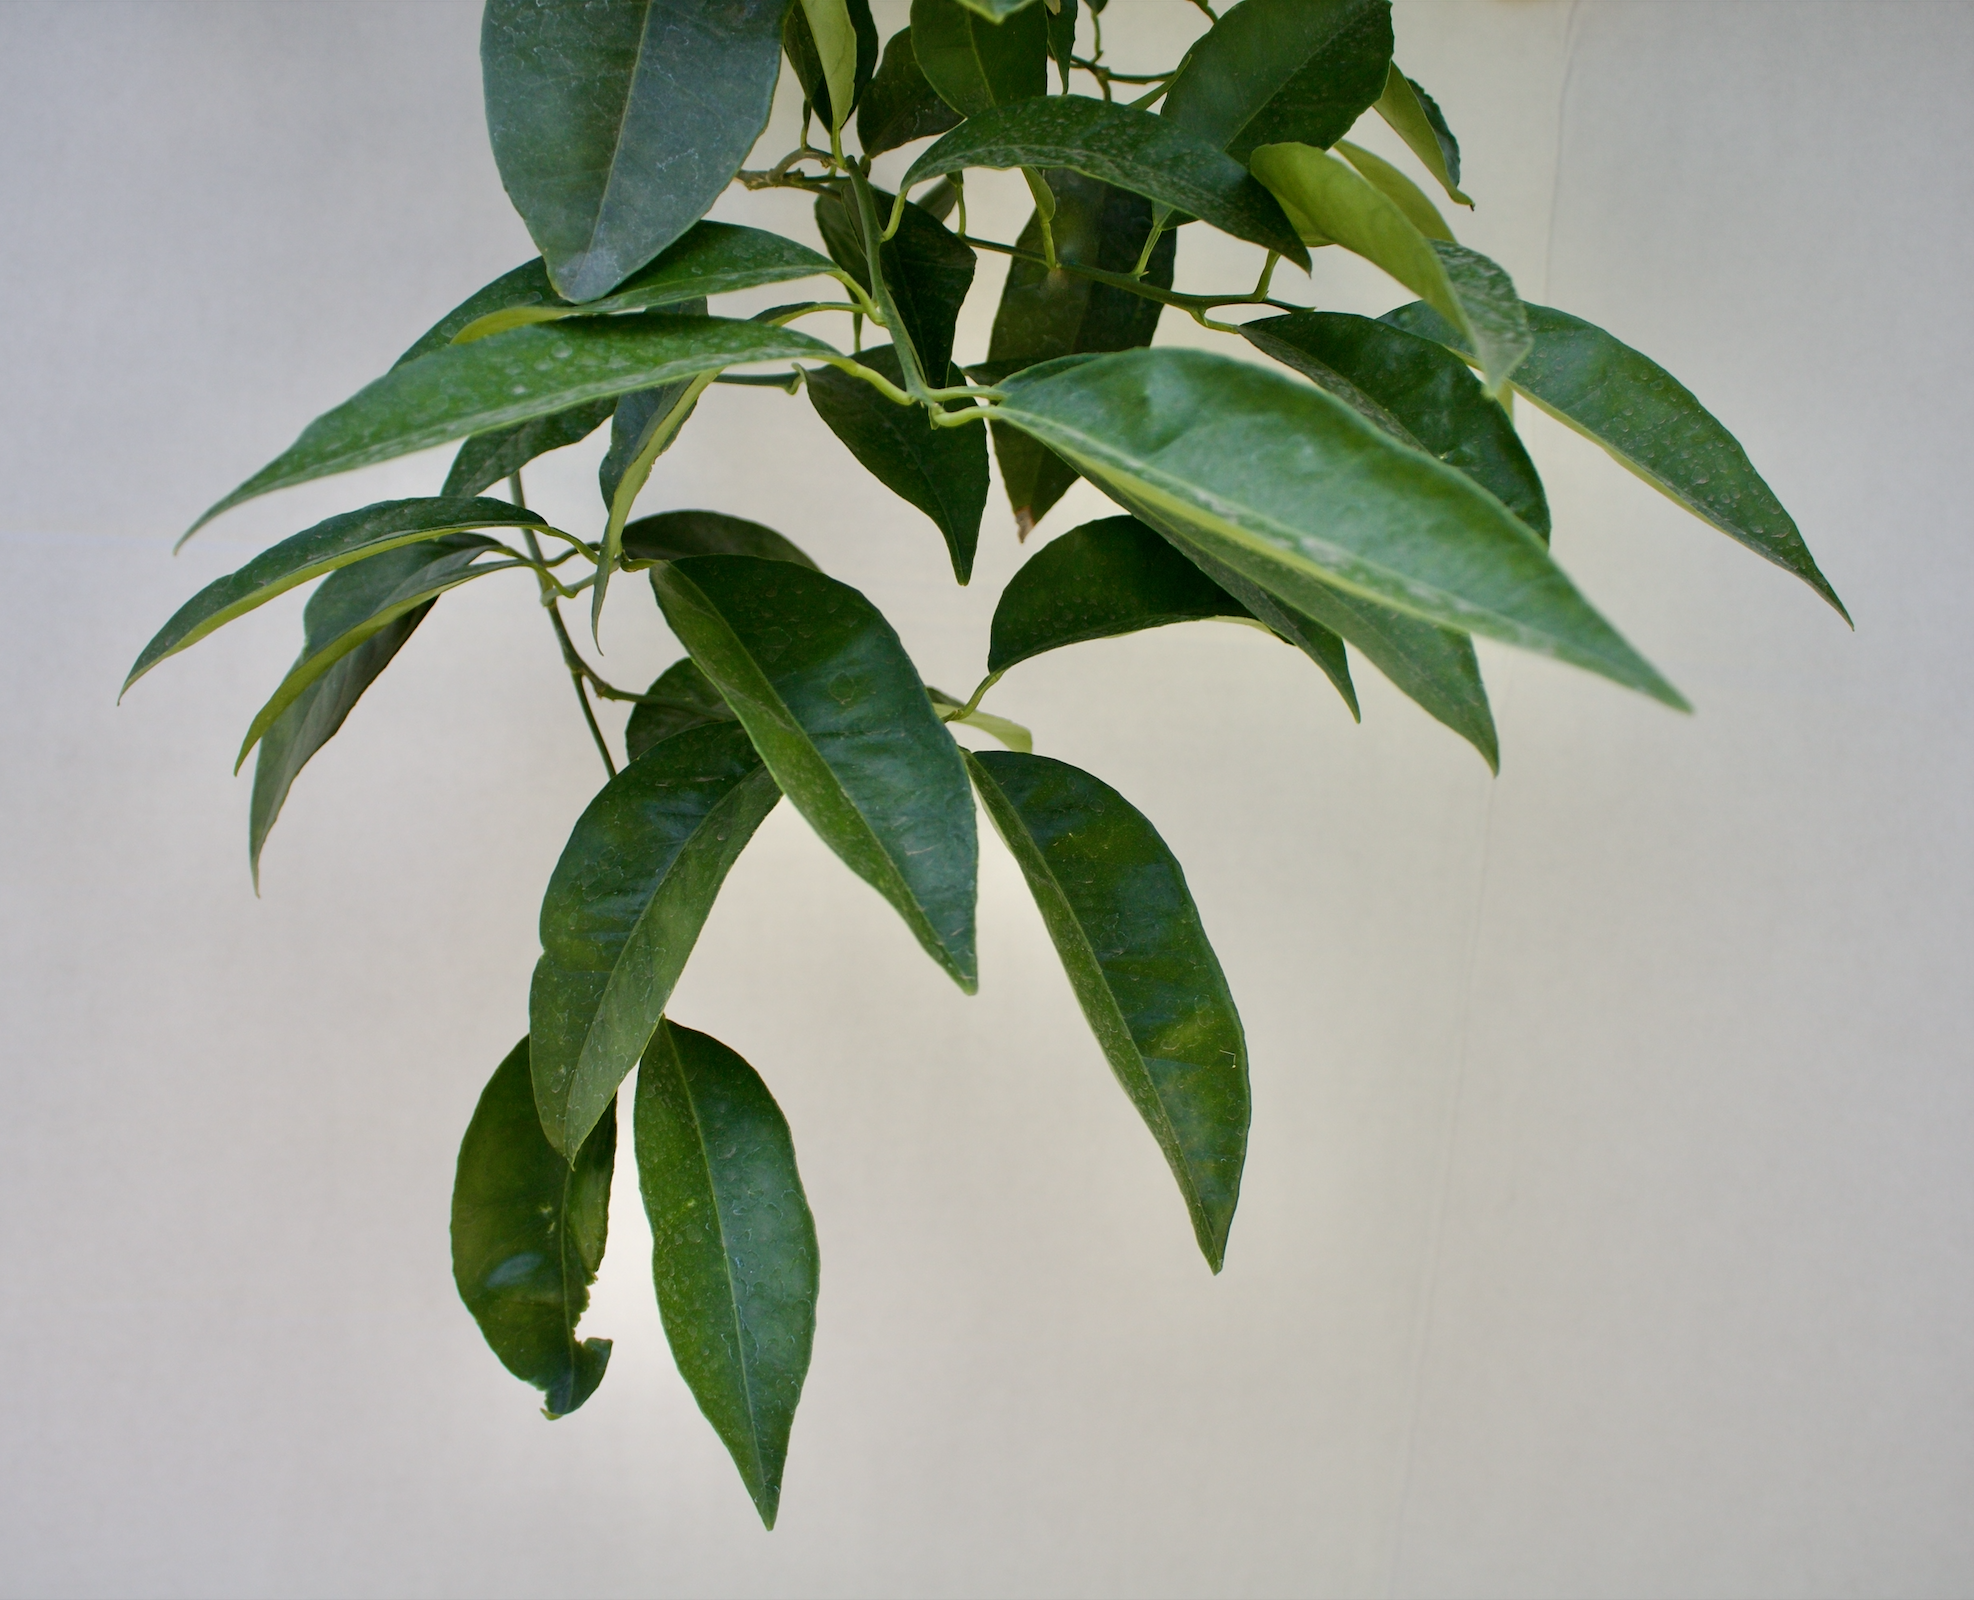 Leaves from an orange tree with a white background.